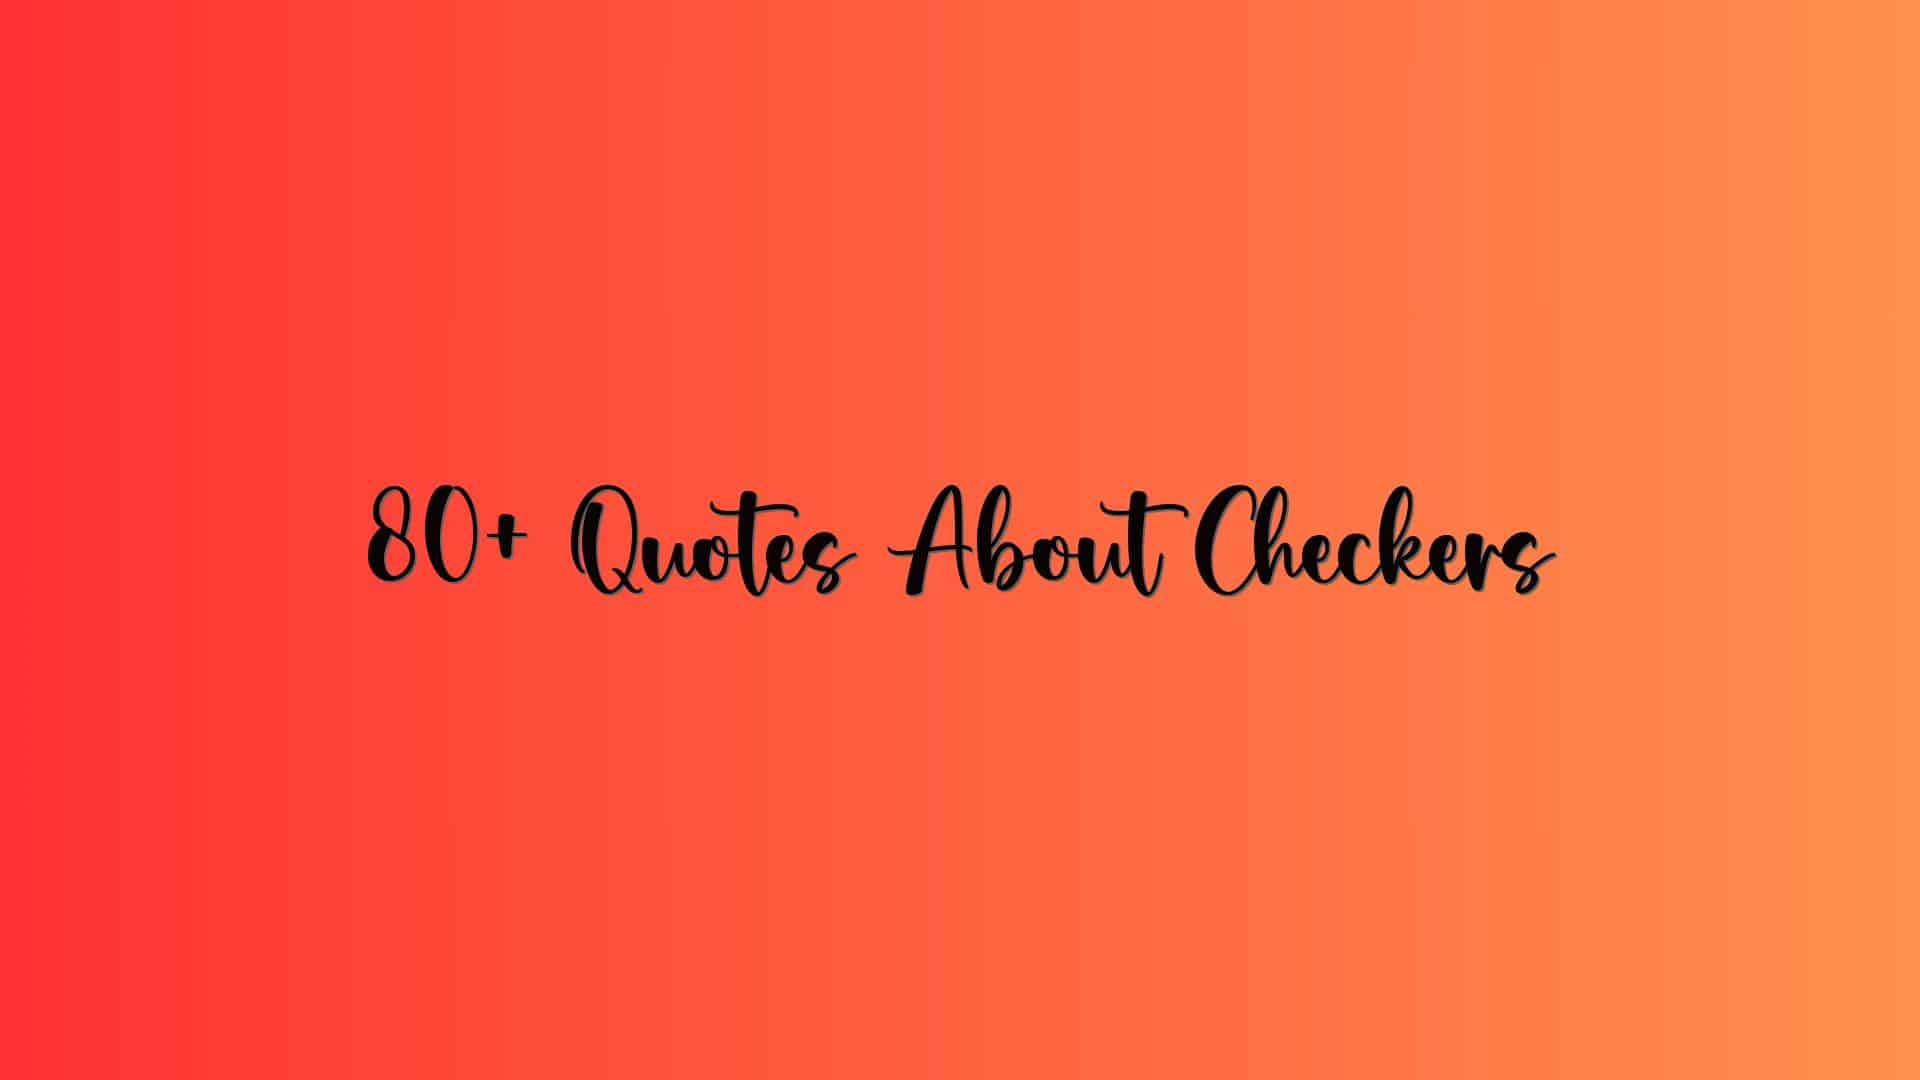 80+ Quotes About Checkers